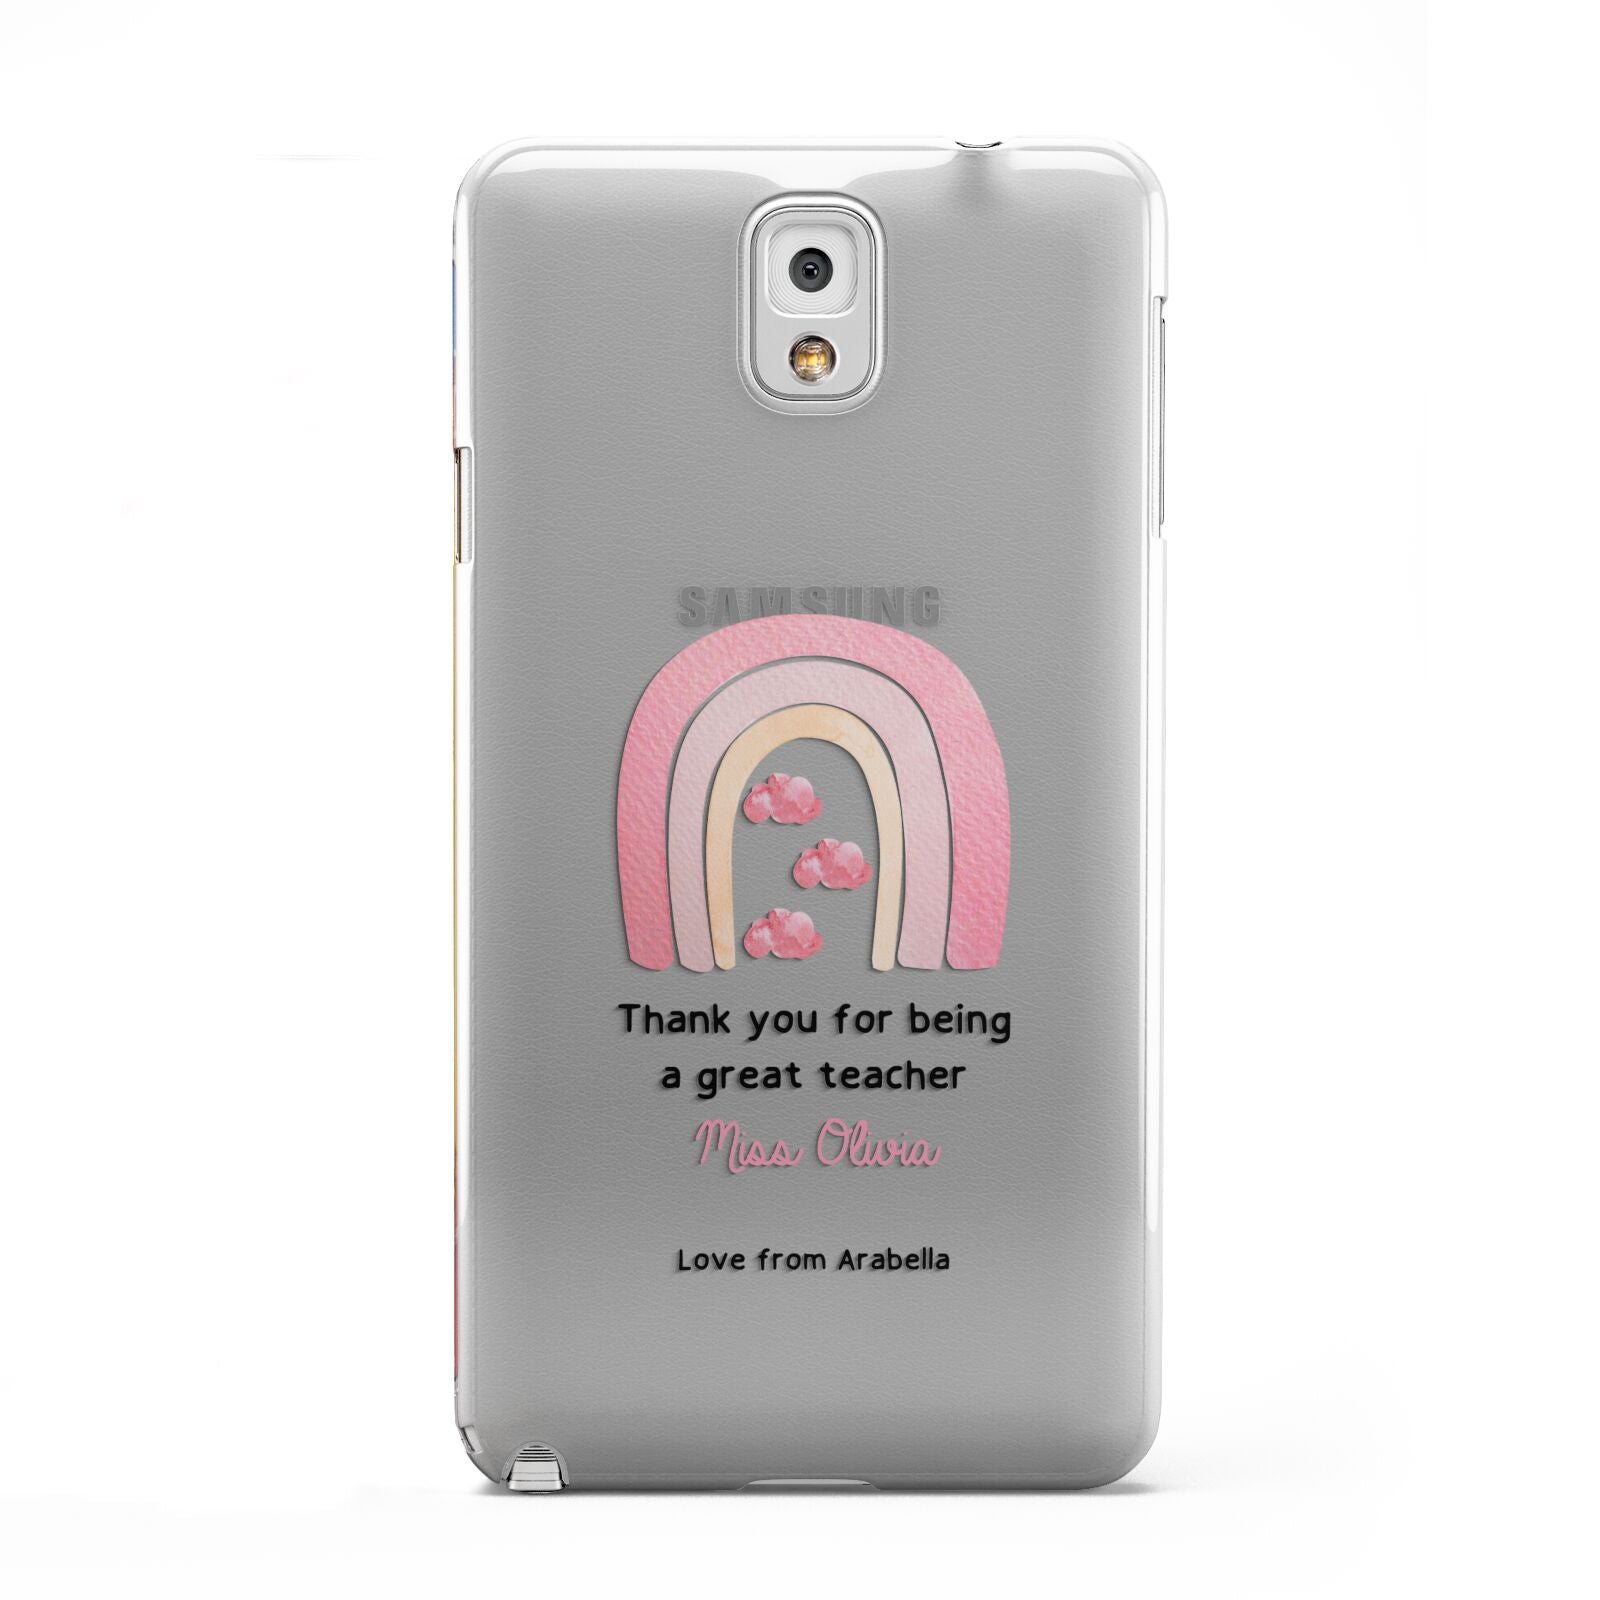 Personalised Teacher Thanks Samsung Galaxy Note 3 Case